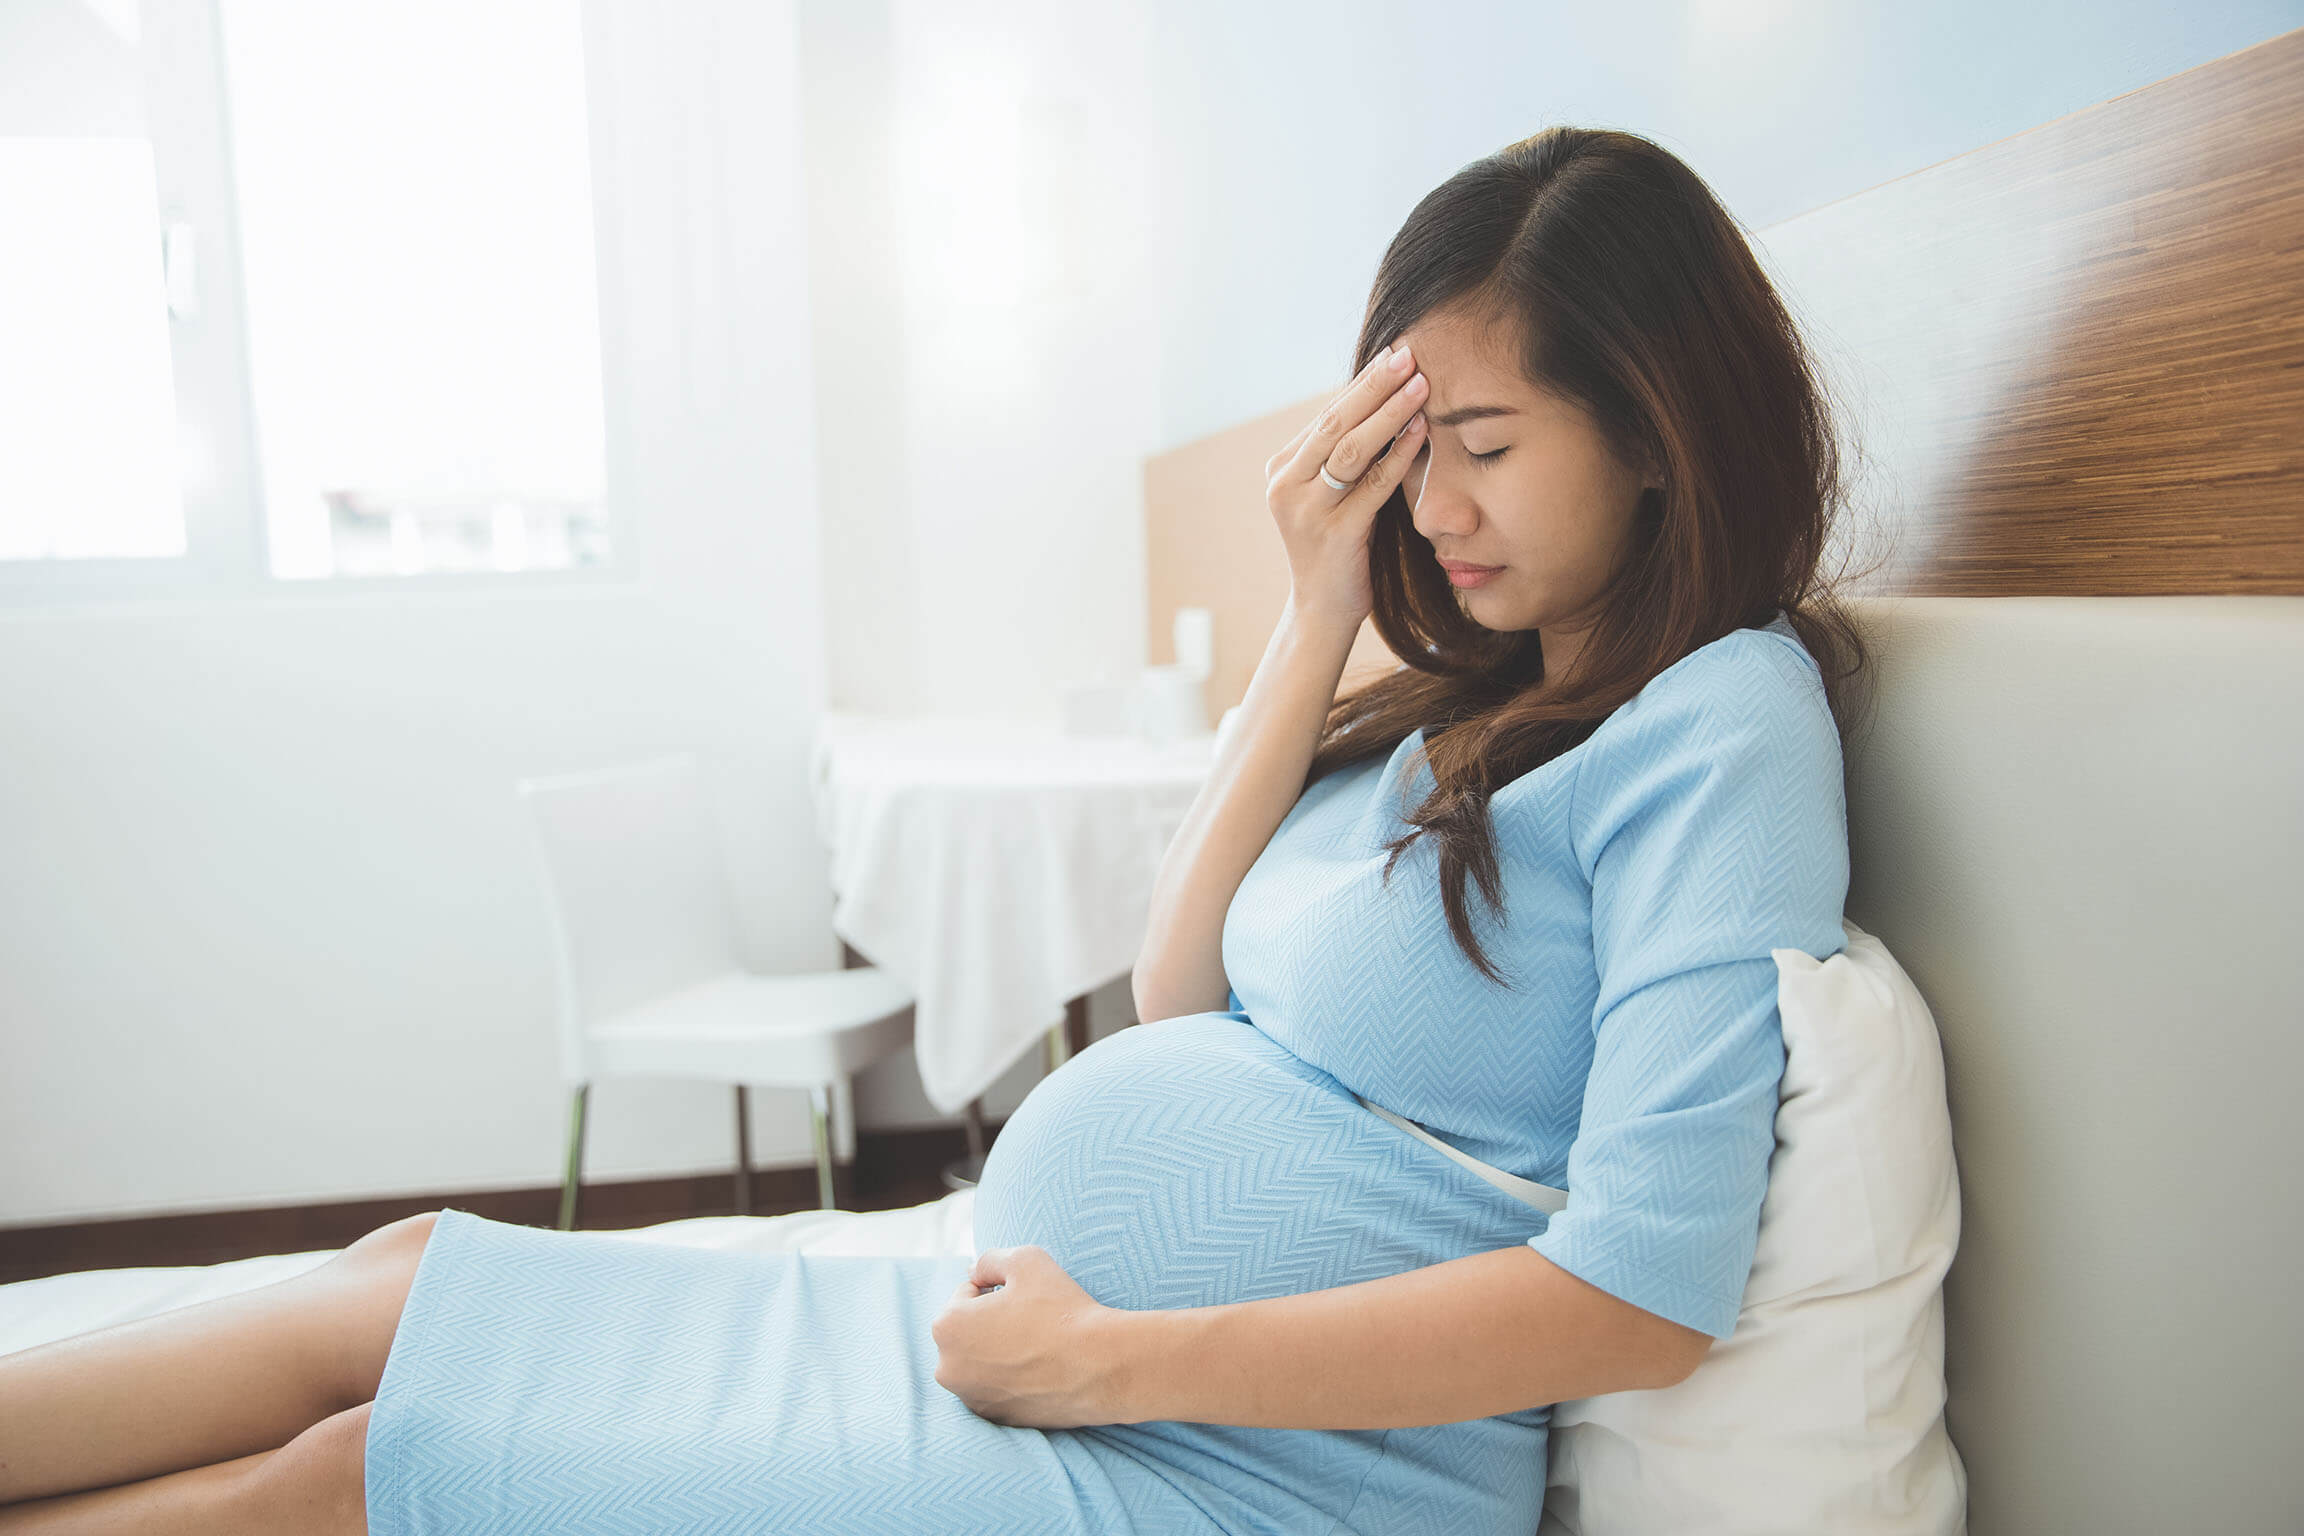 Physical Body Changes to Expect During Pregnancy